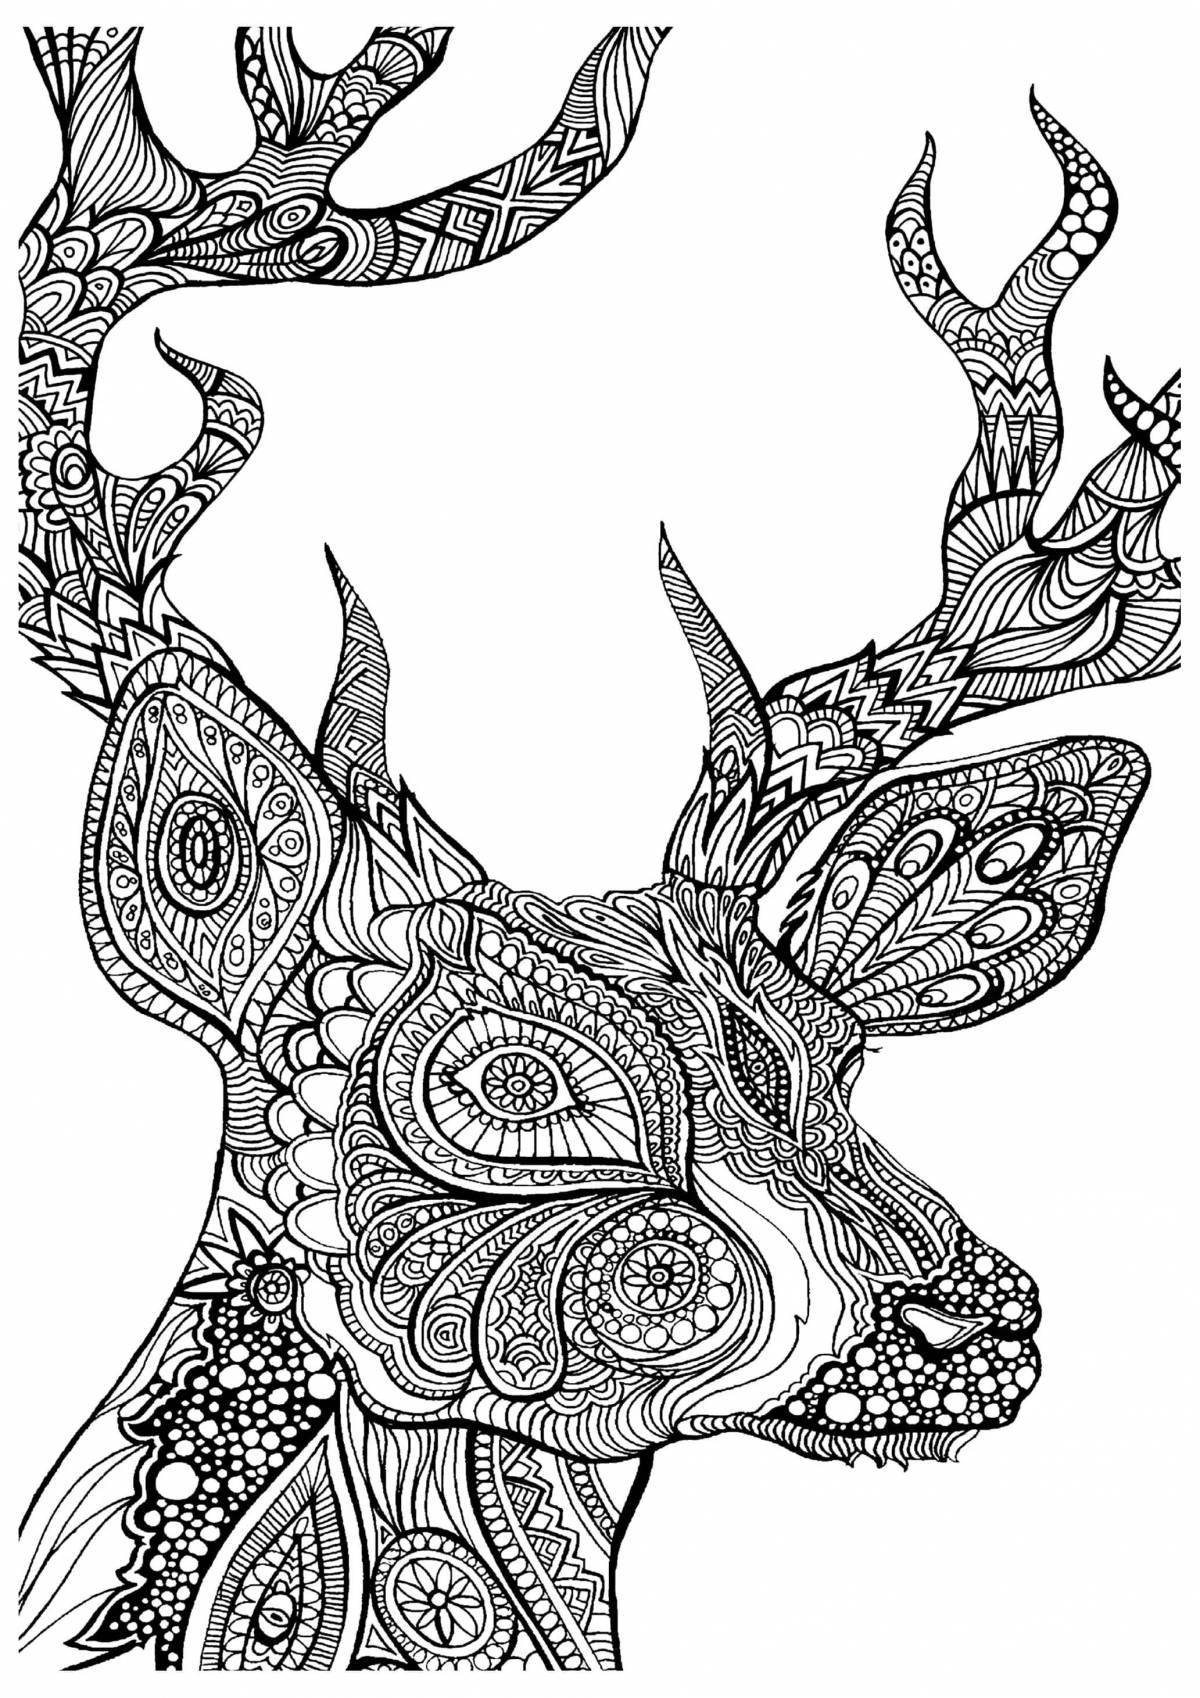 Fancy animal coloring book